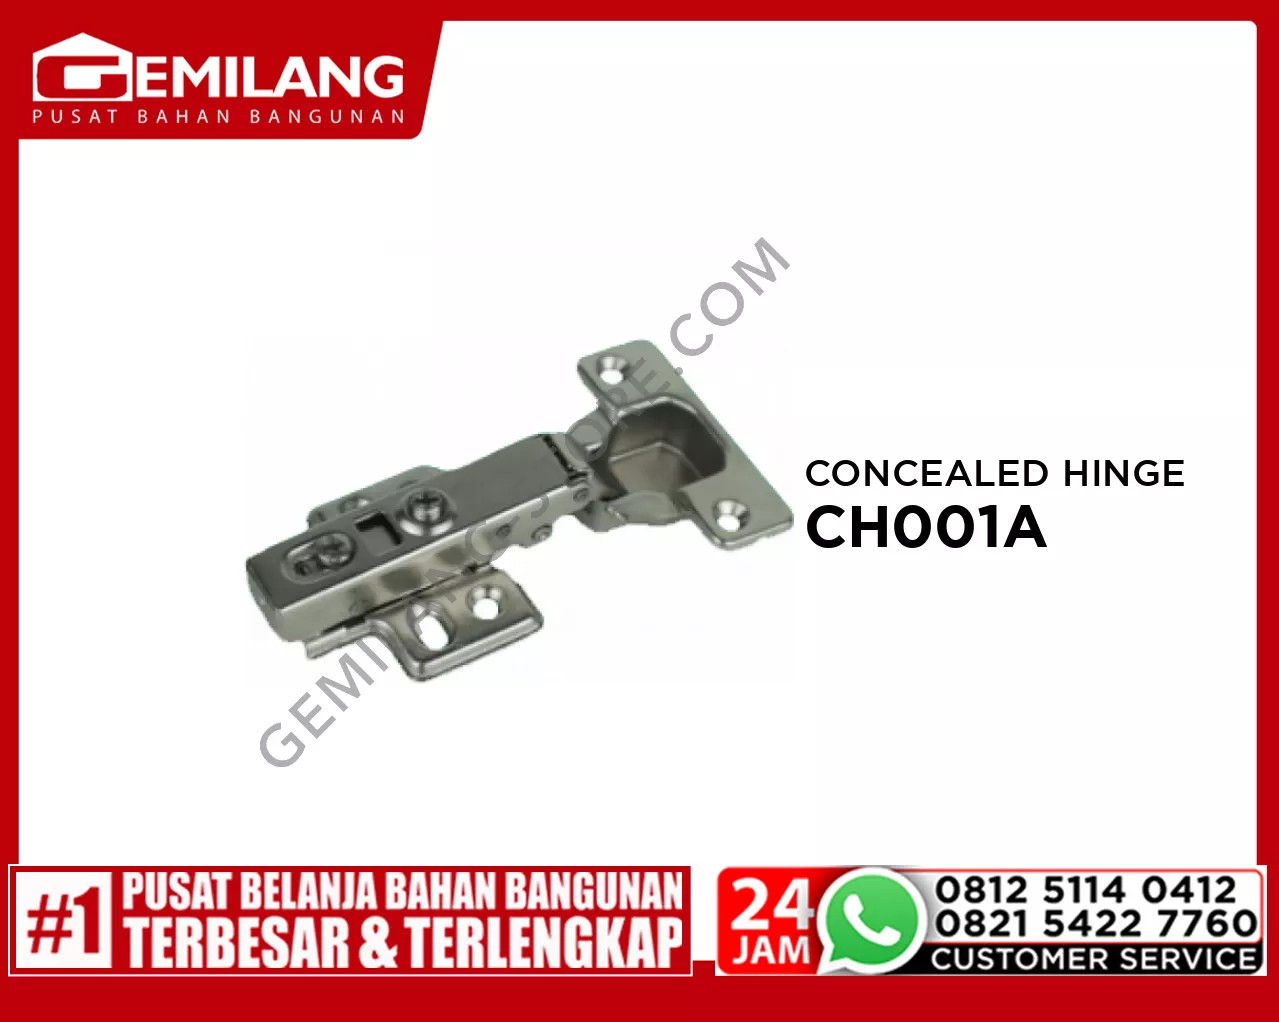 CONCEALED HINGE WITH MOUNTING PLATE CH001A CR 0 BASIC NK STEEL